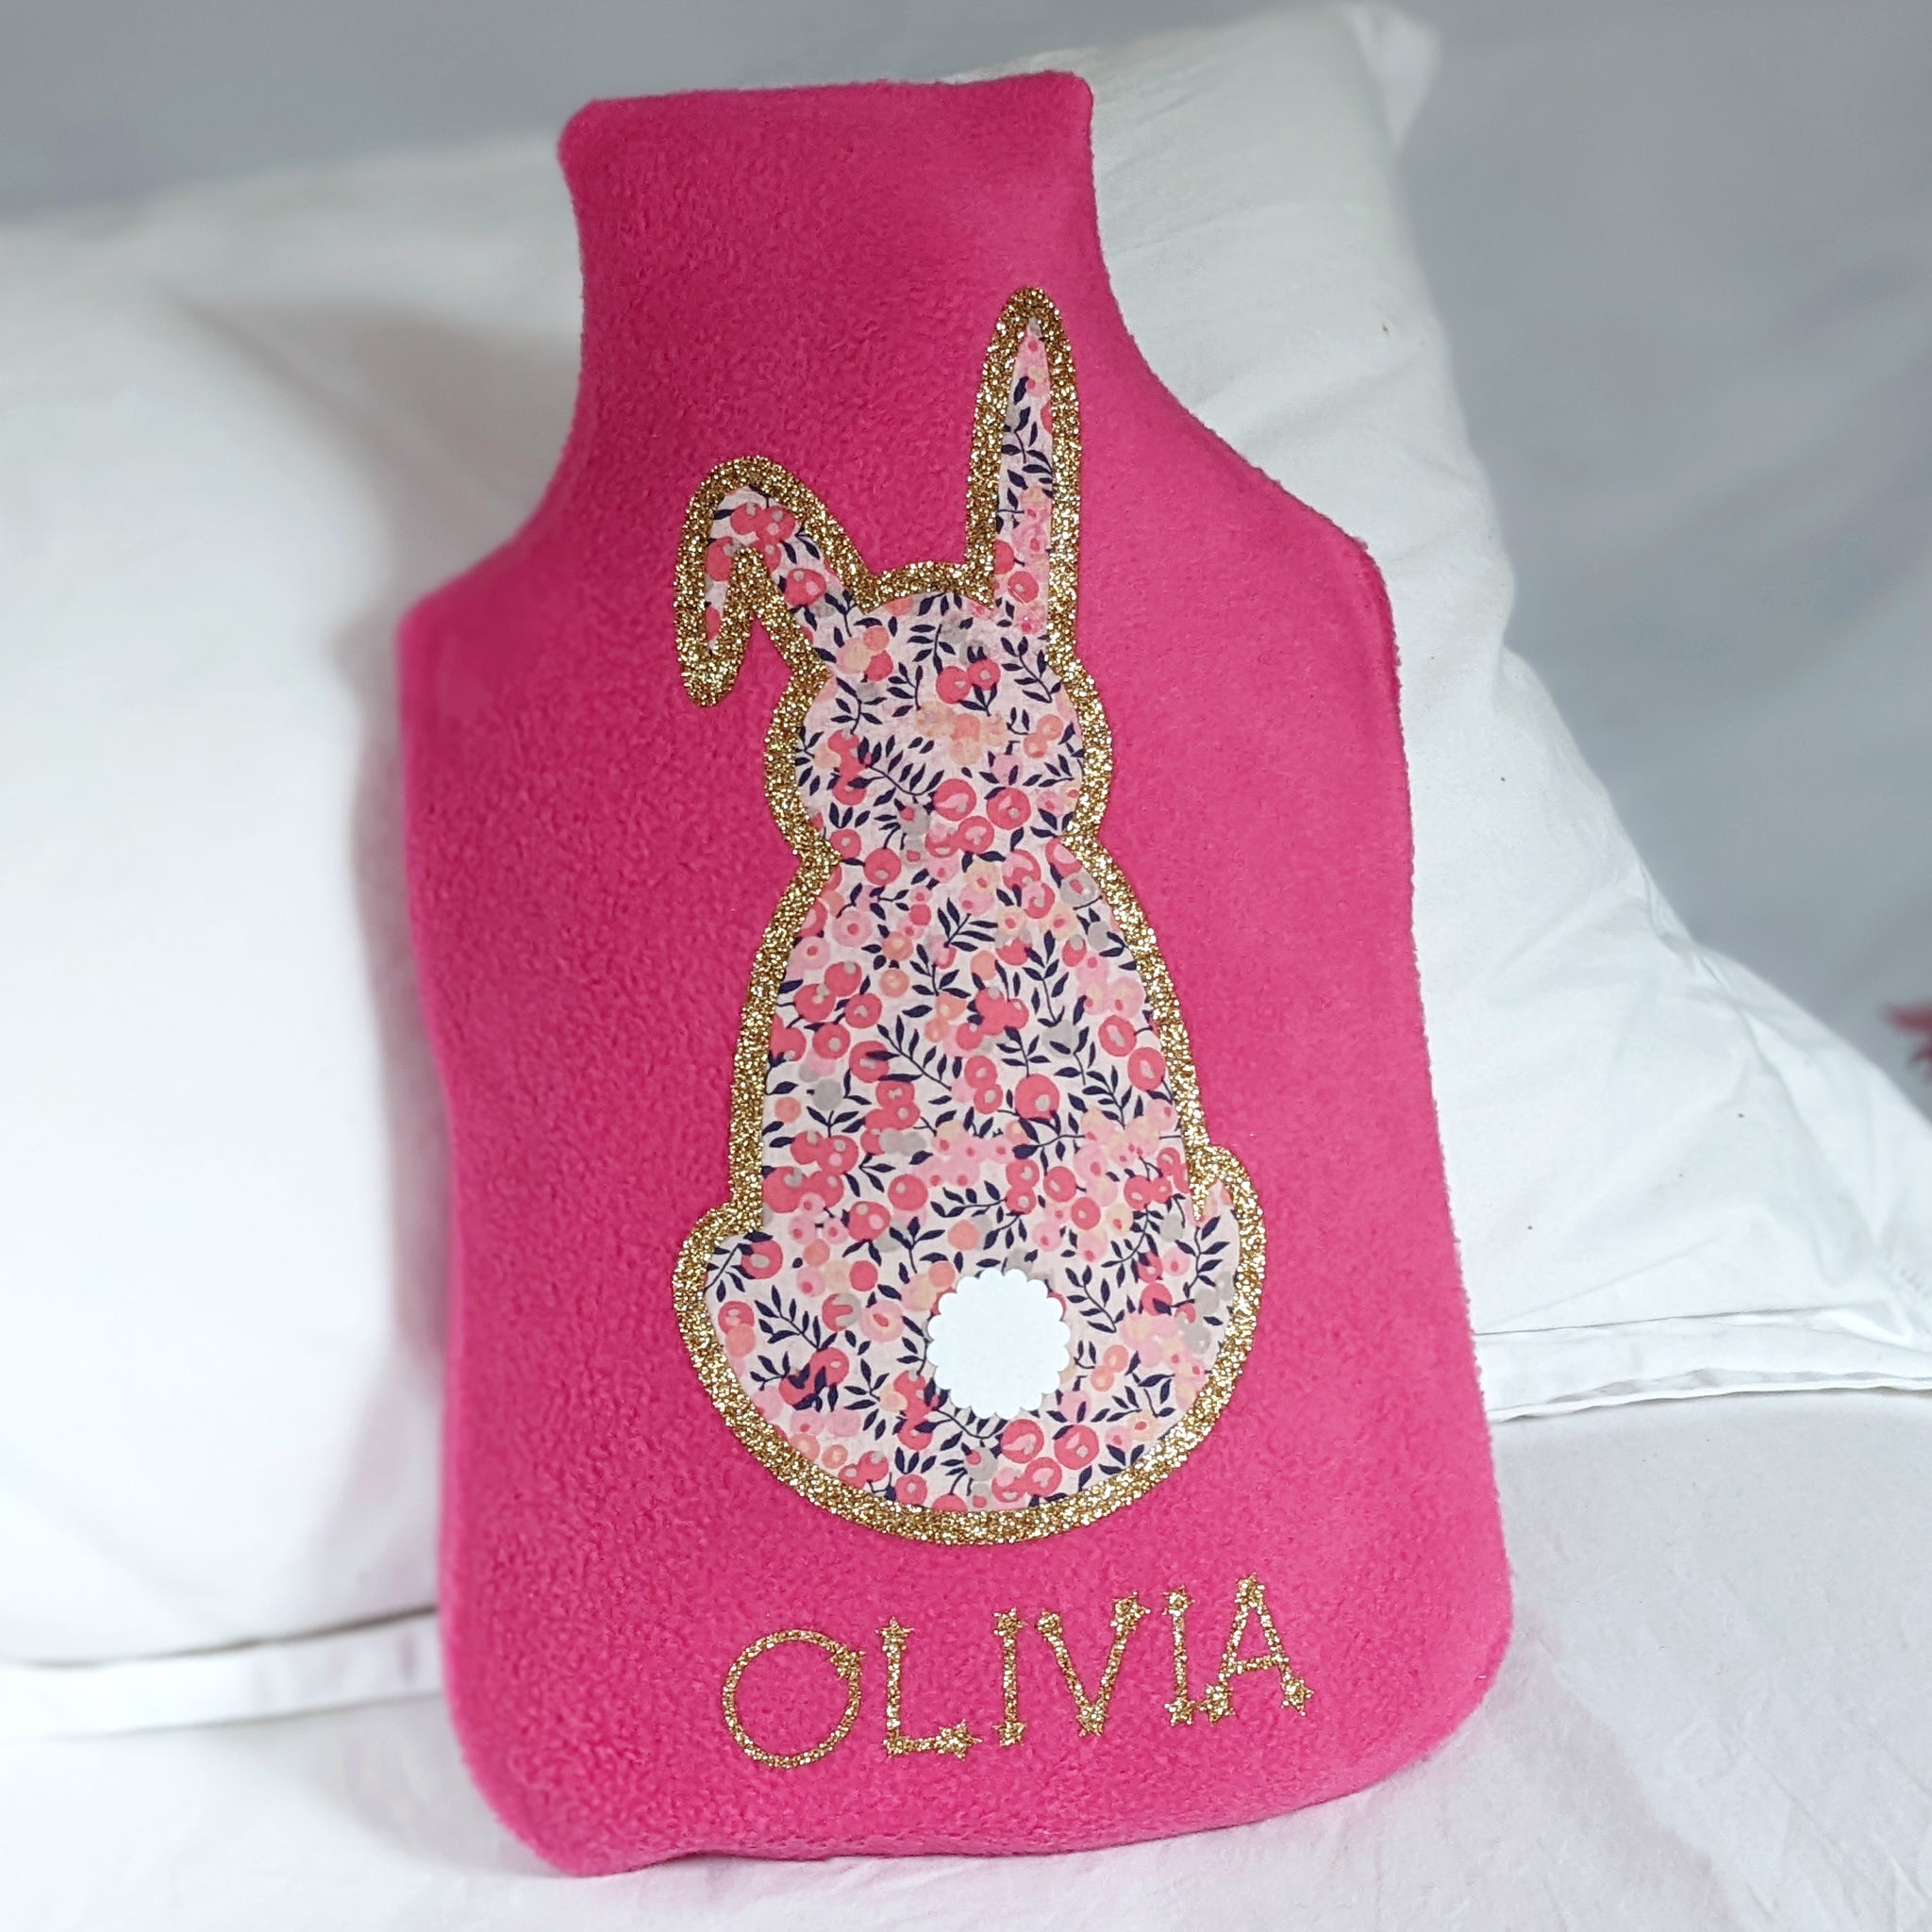 Liberty personalised rabbit hot water bottle cover